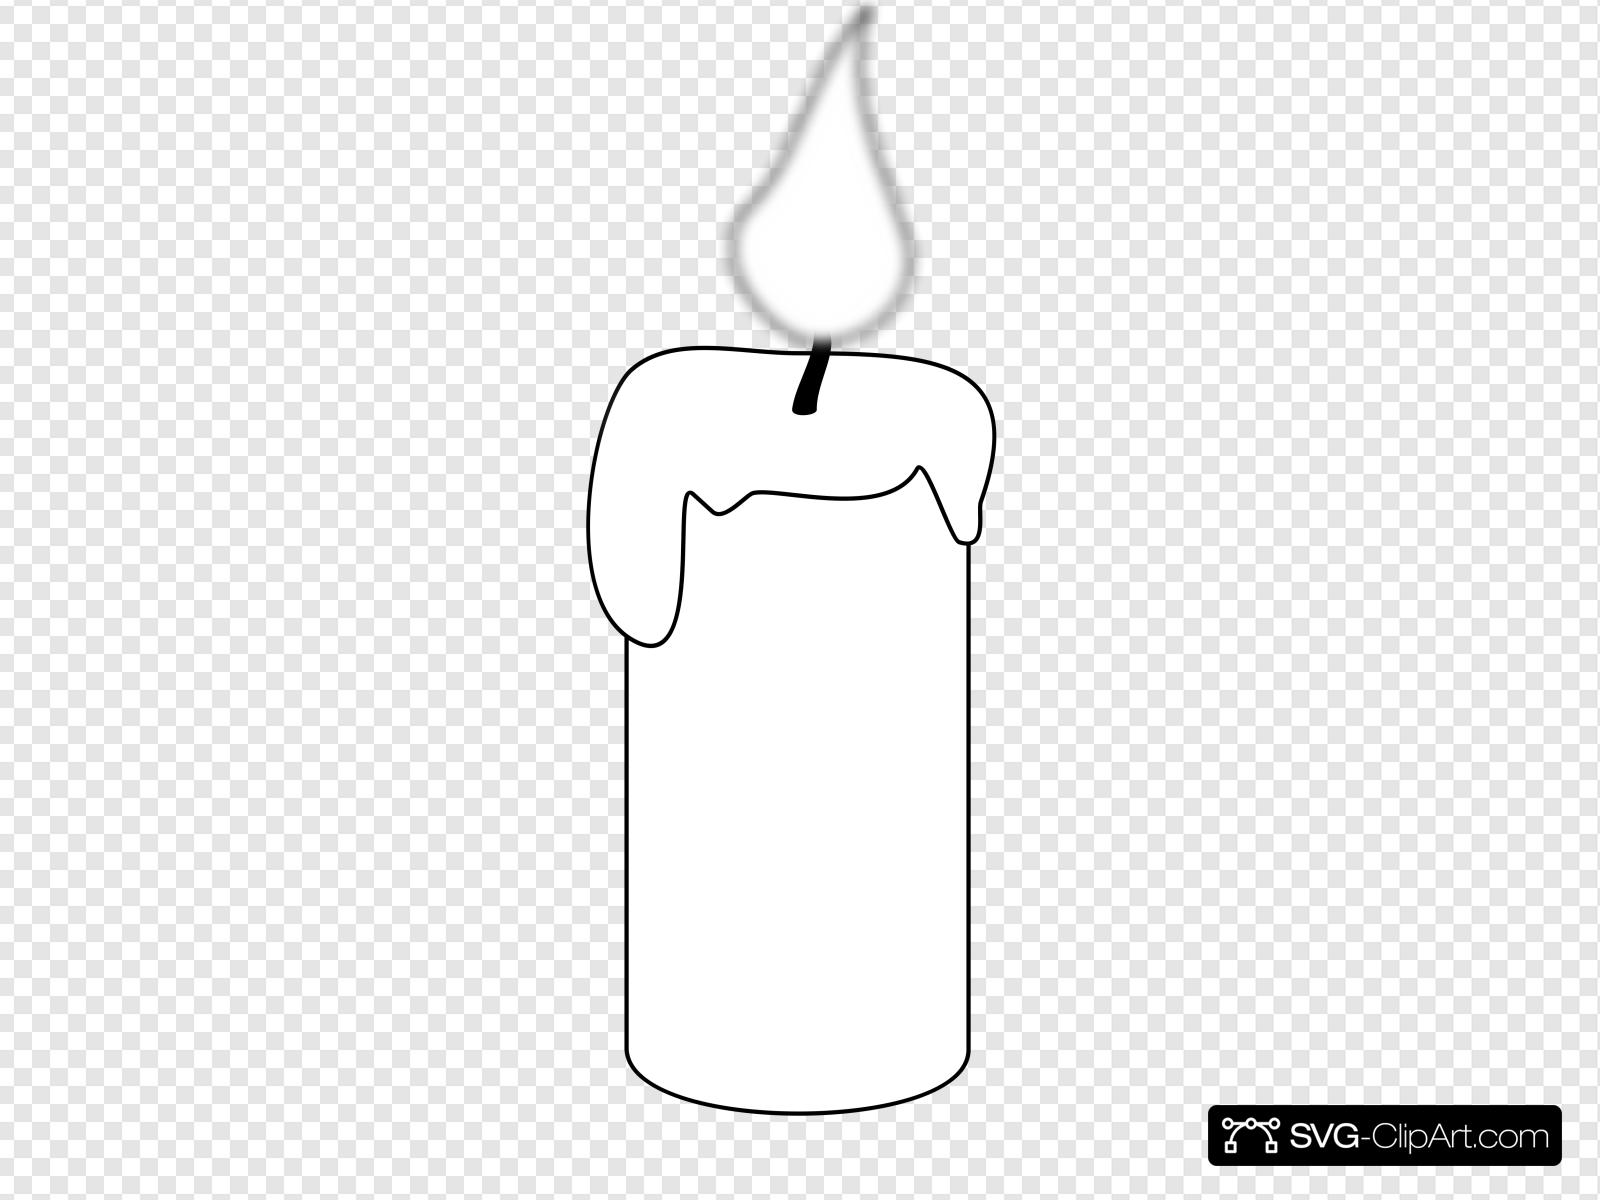 Clipart candle outline, Clipart candle outline Transparent FREE for